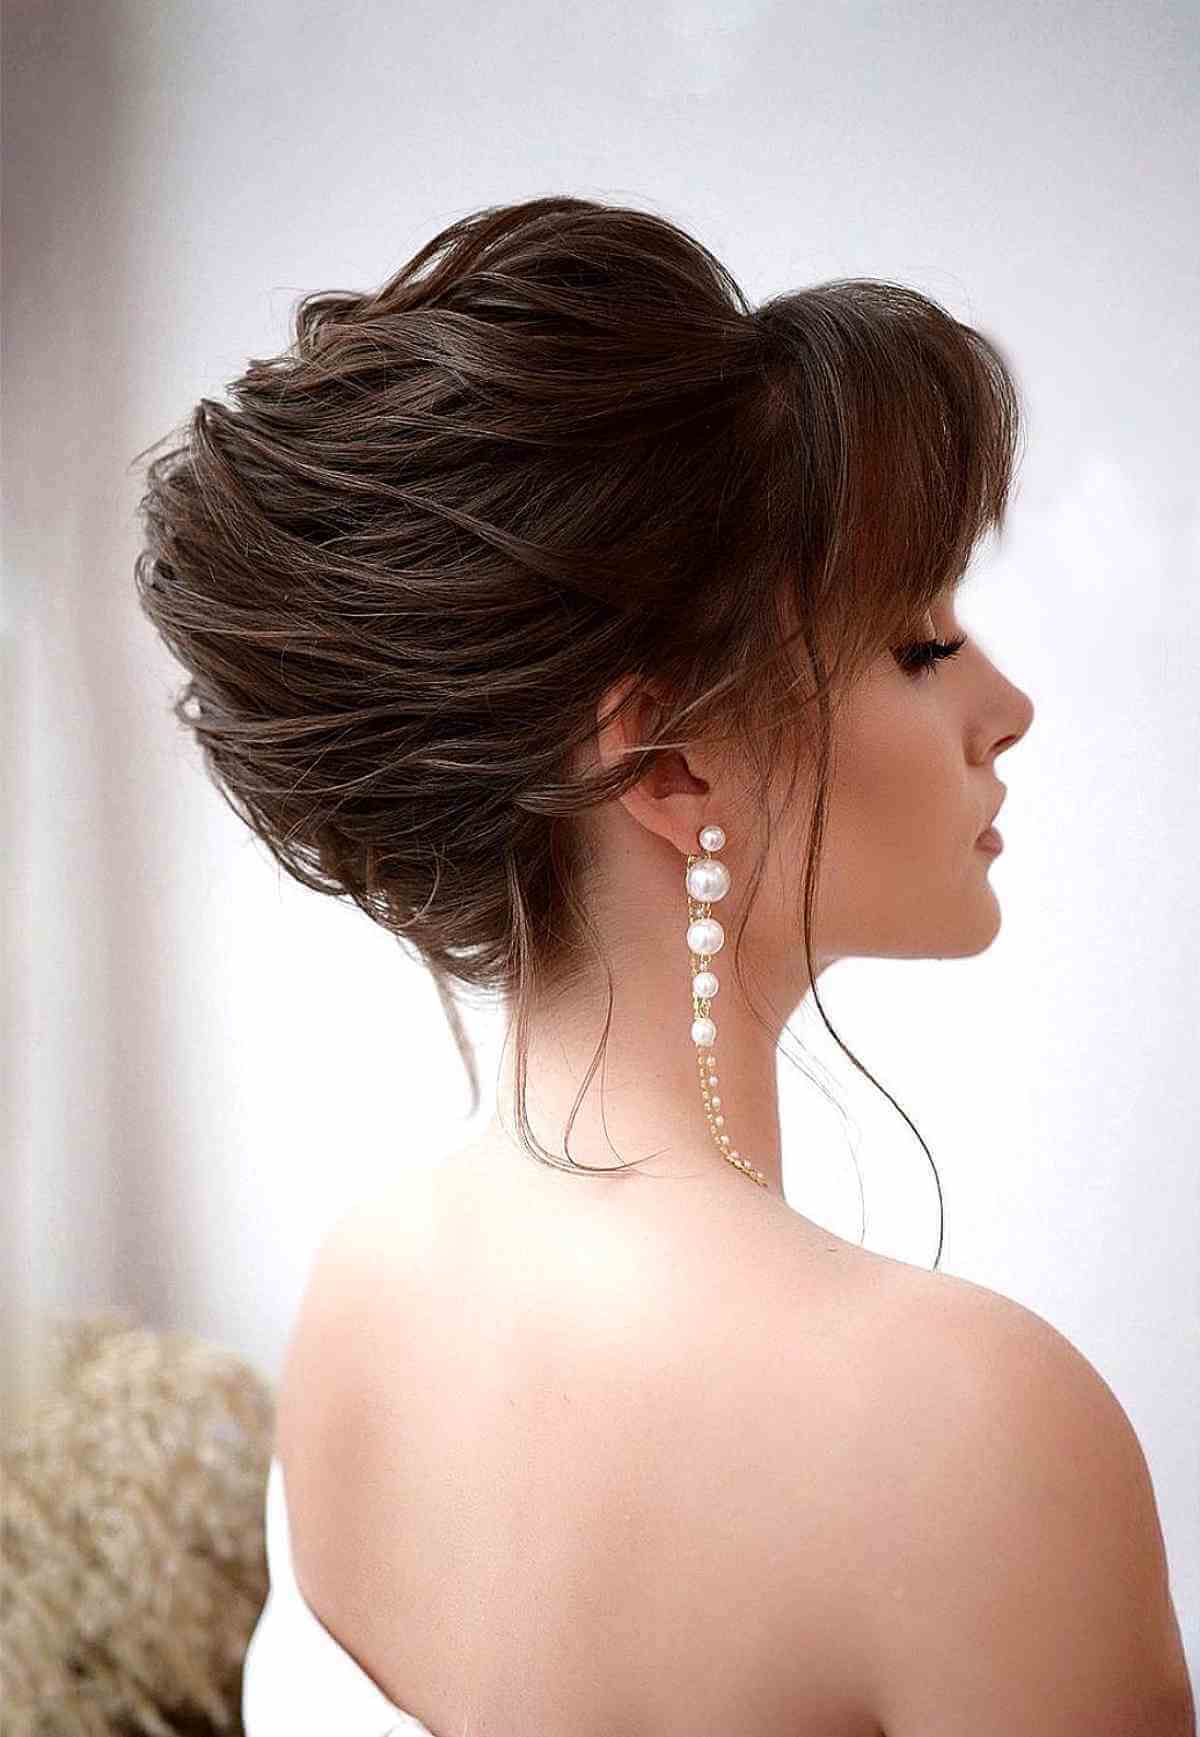 Retro Meets Modern Updo Long Hair for Prom